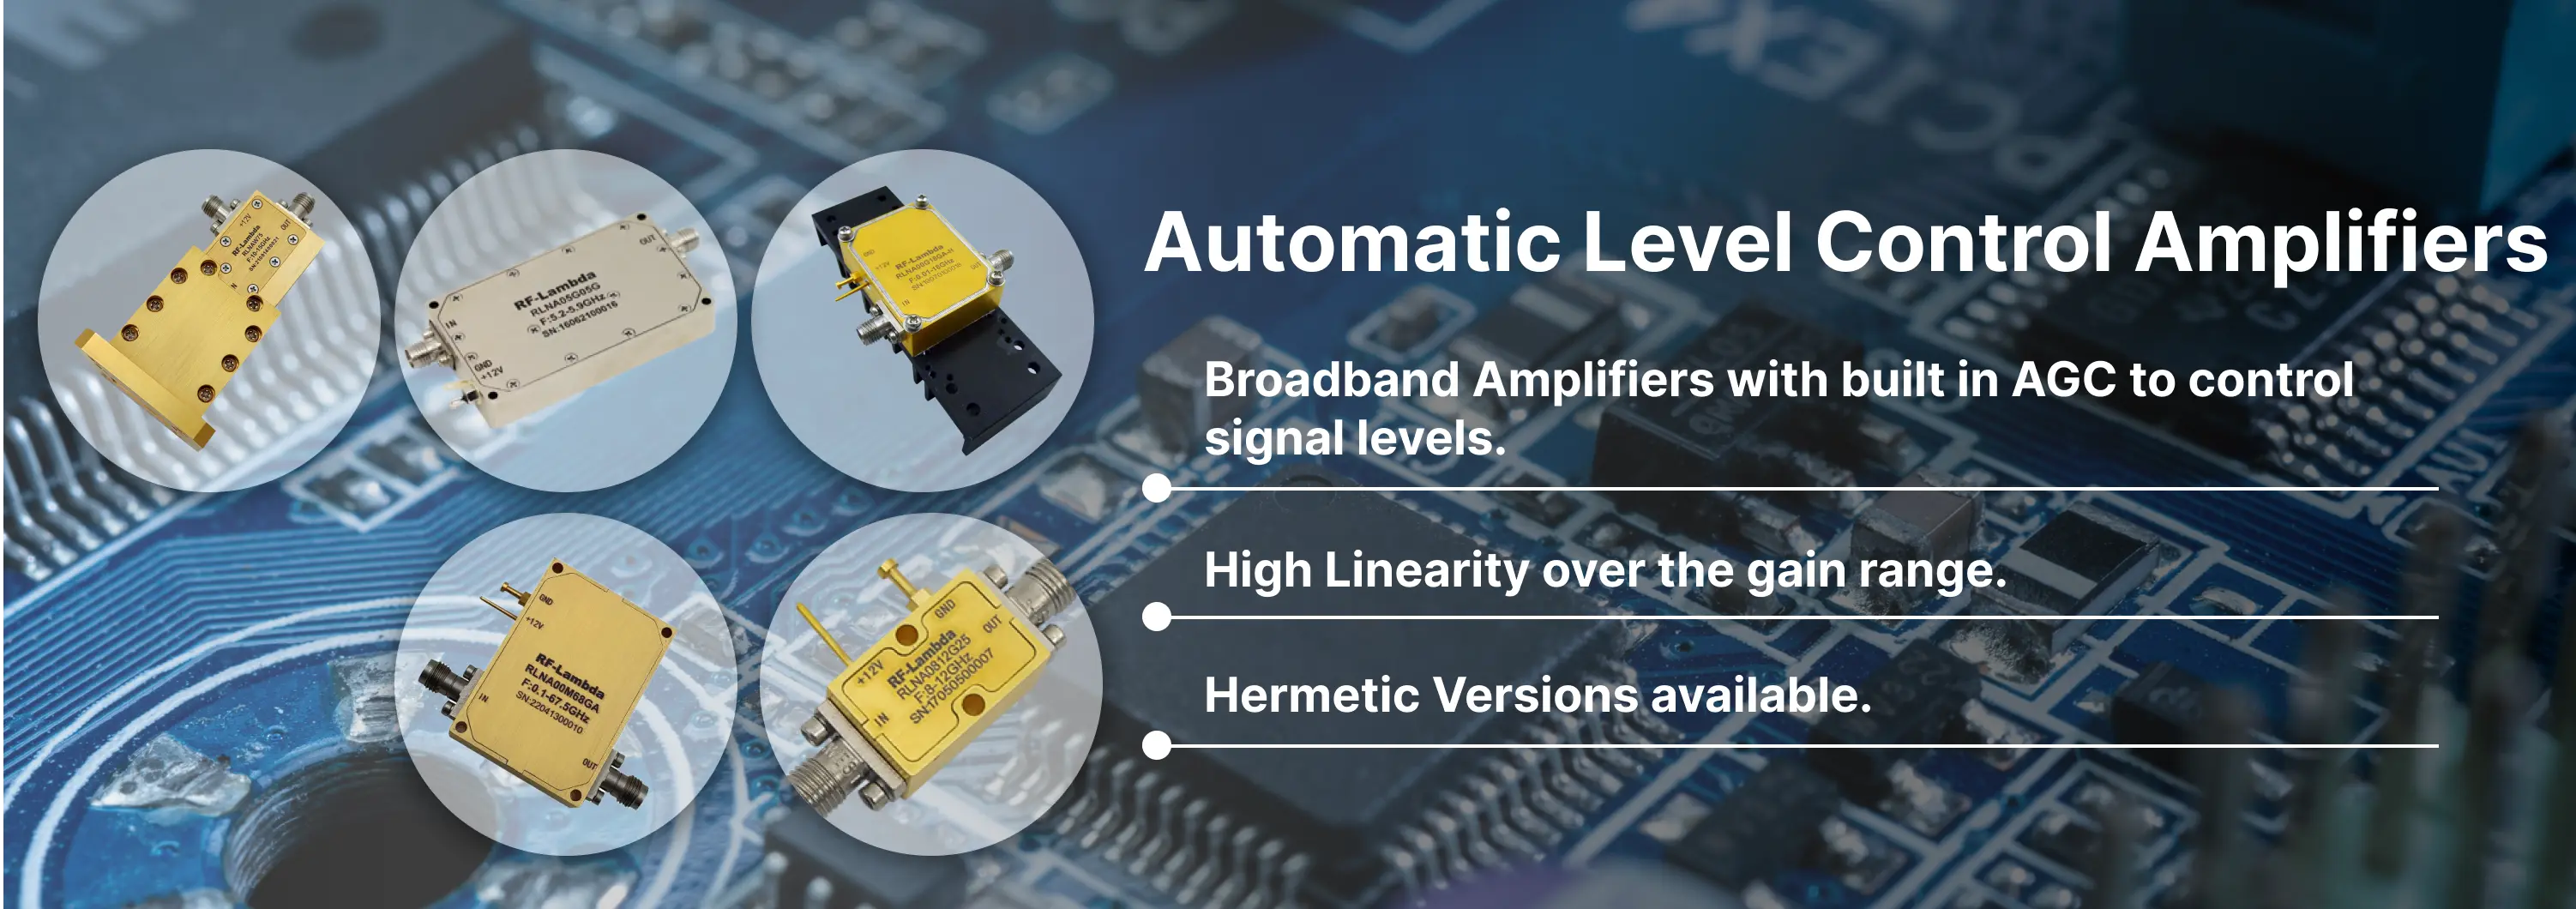 Automatic Level Control Amplifier Banner